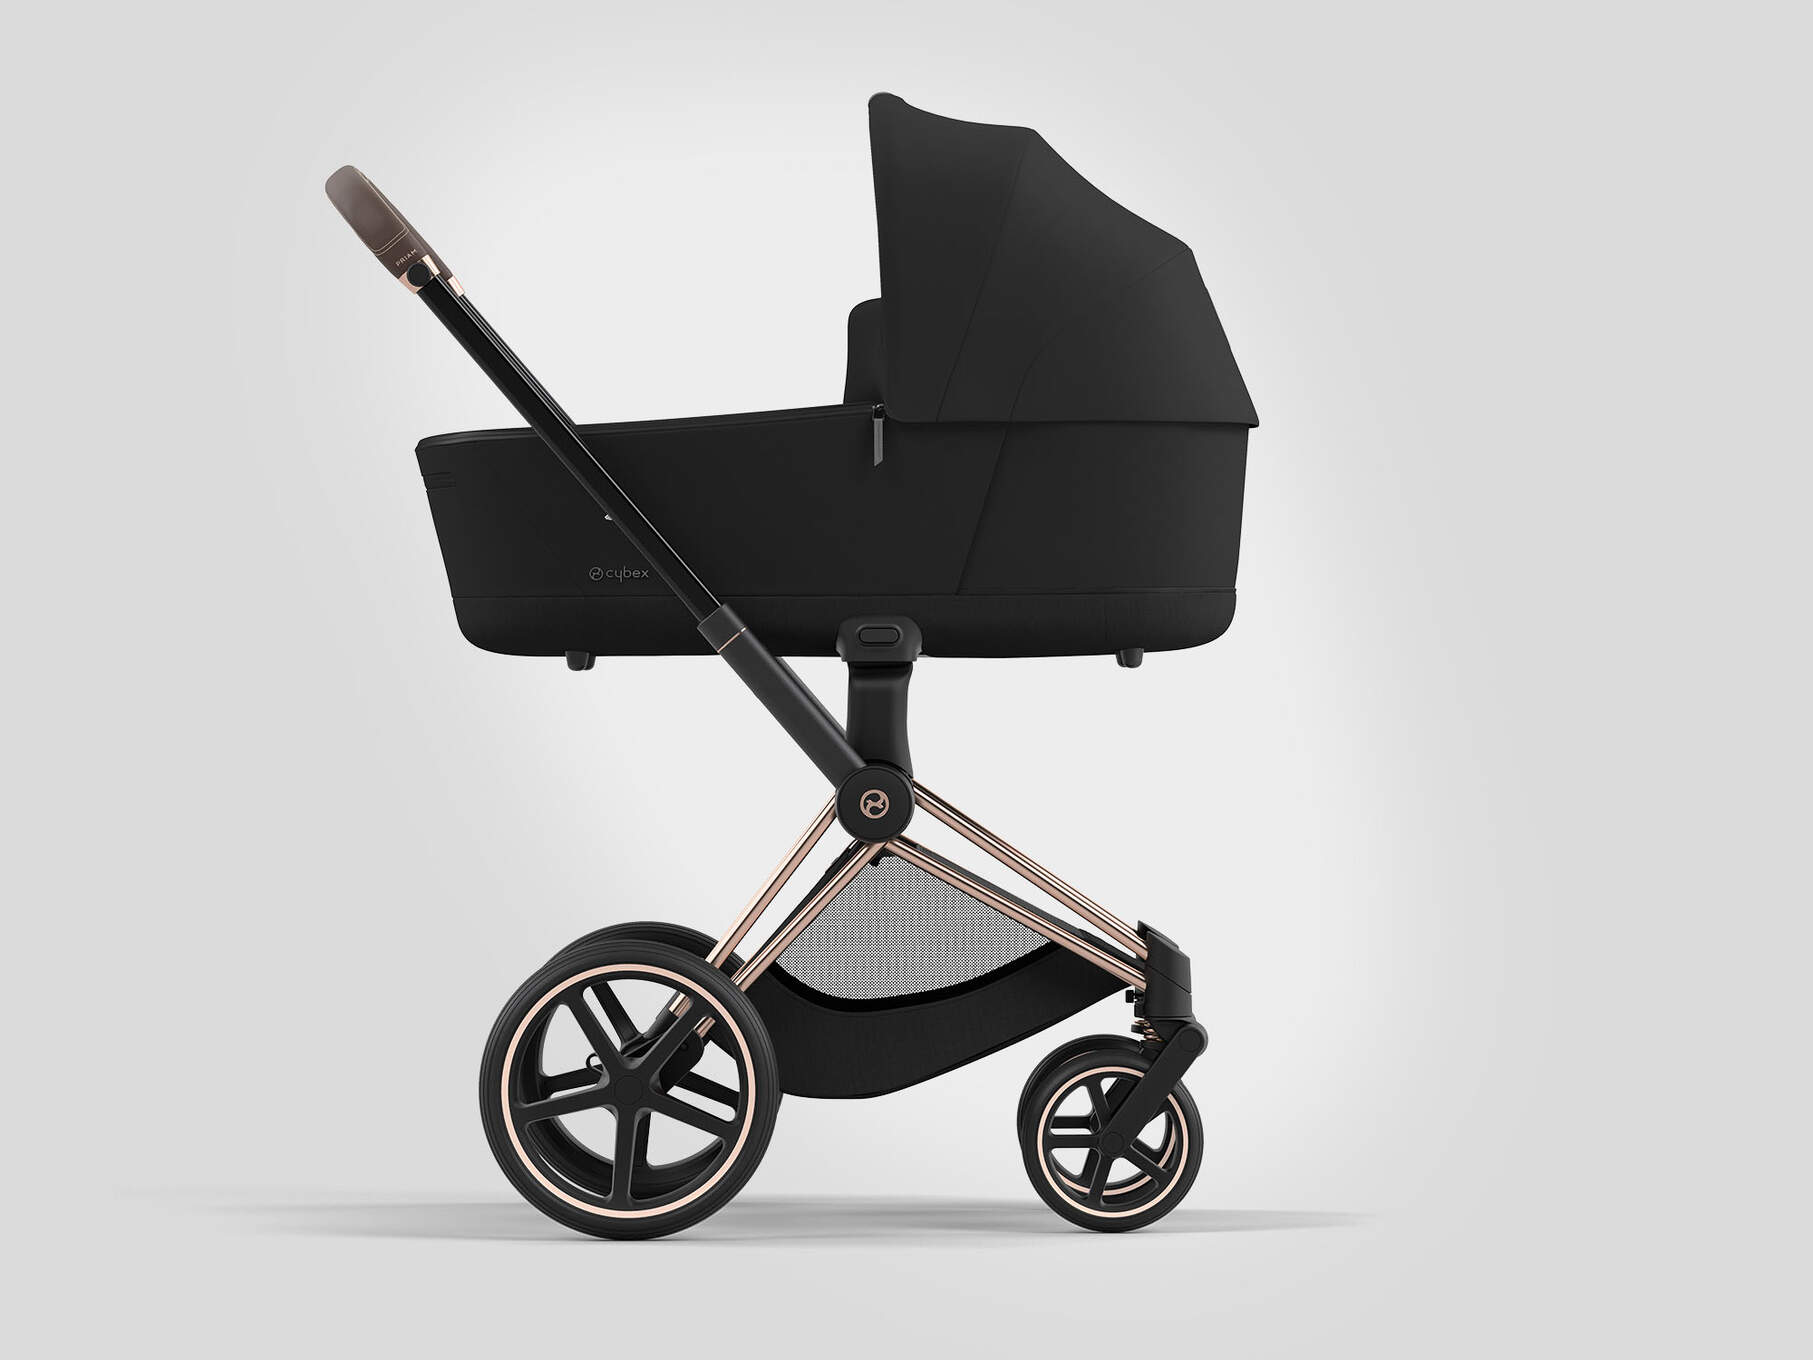 CYBEX Platinum Pushchair Priam Lux Carry Cot shown on Priam Frame